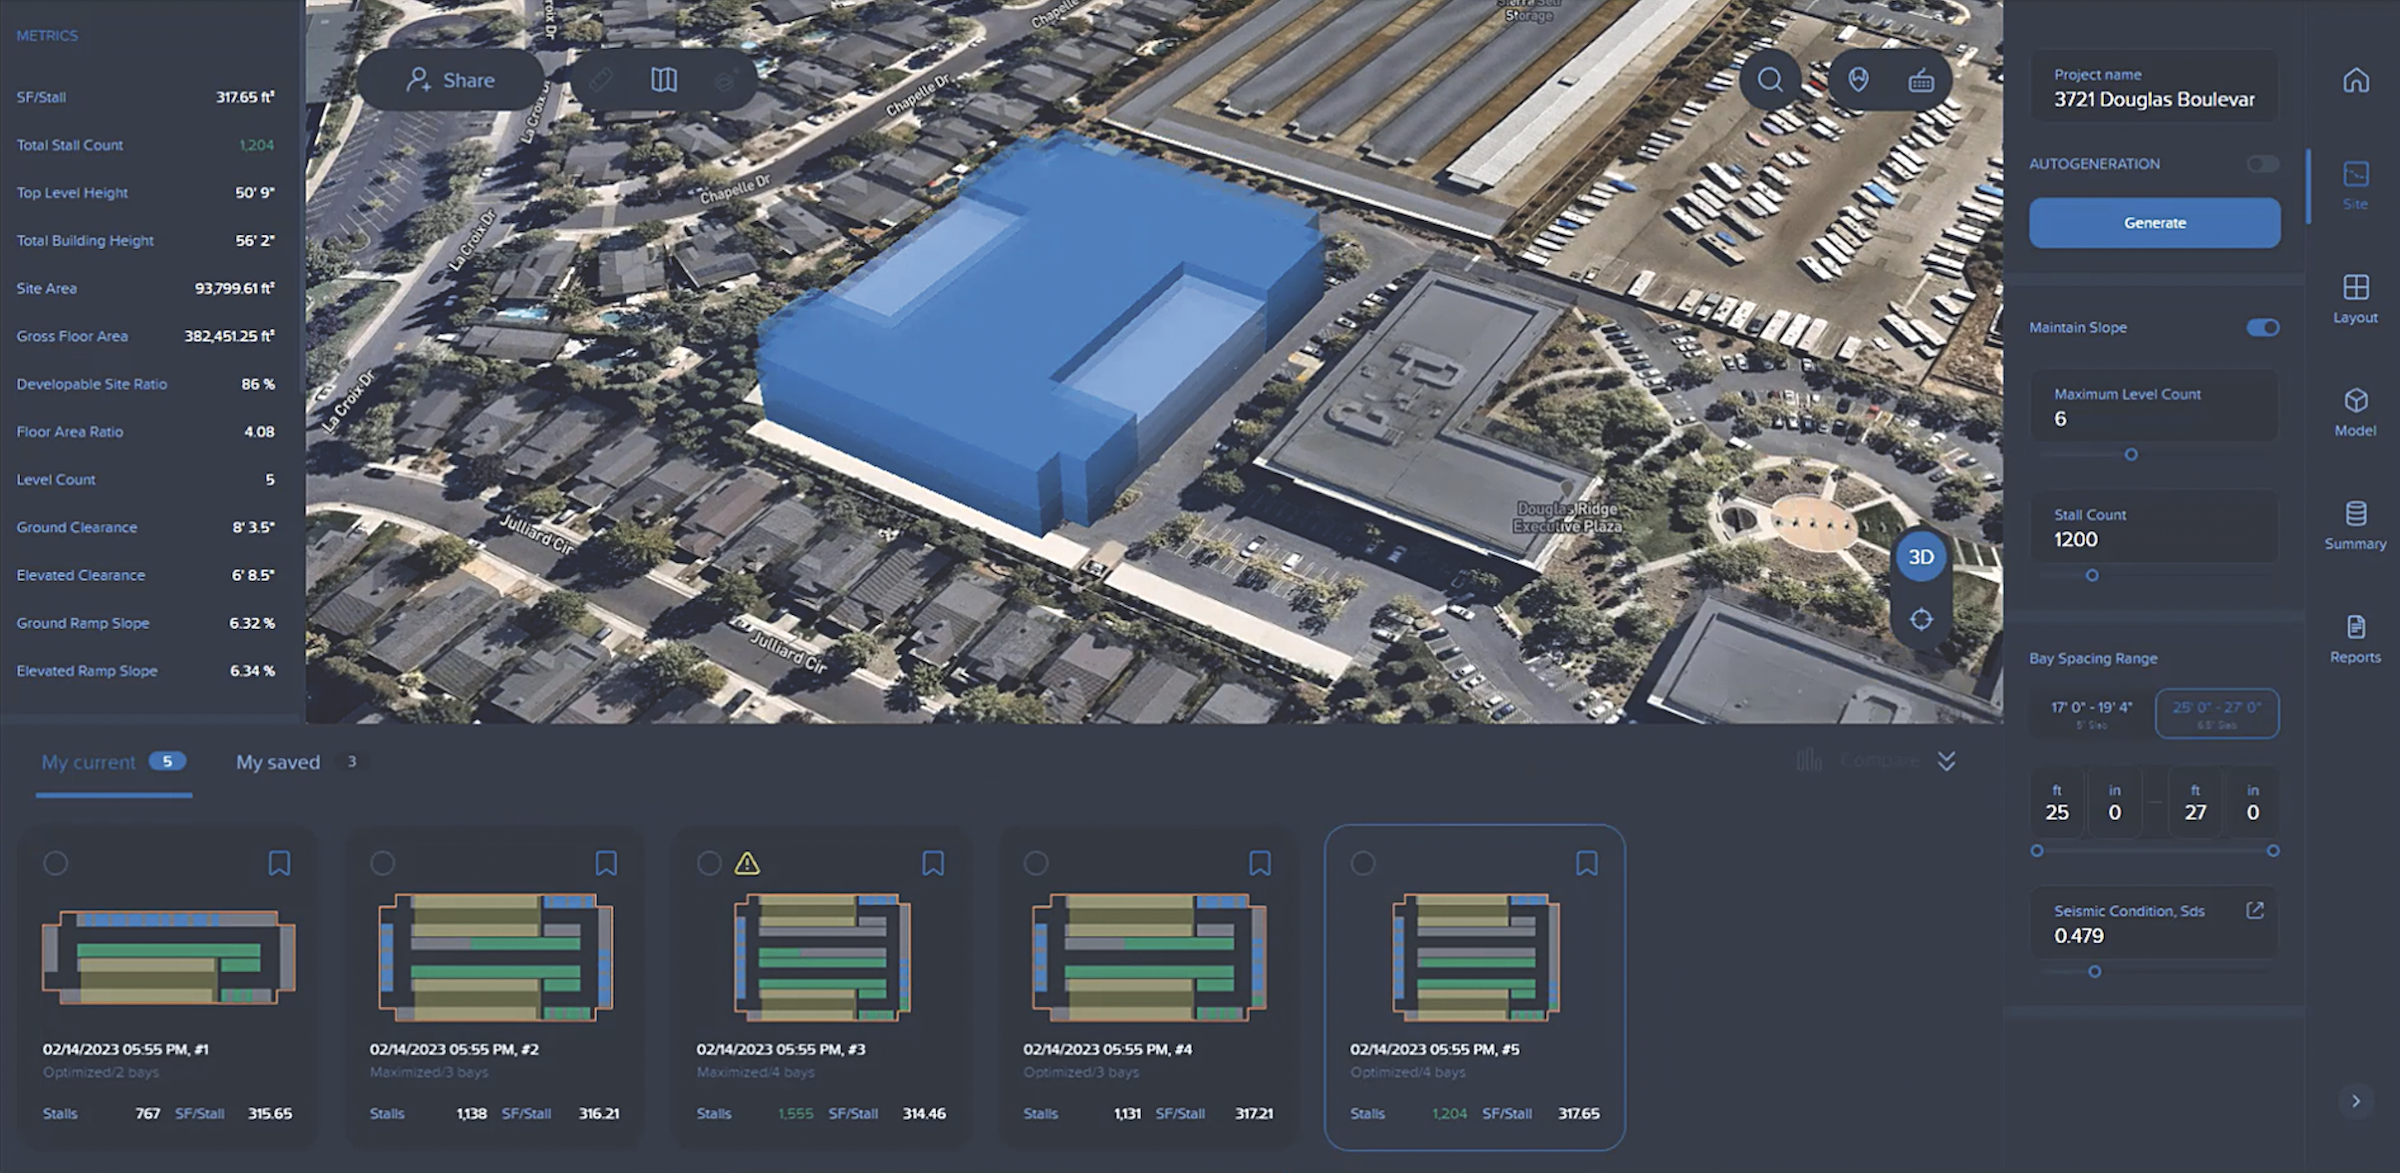 McCarthy SiteShift generates parking structure designs in minutes